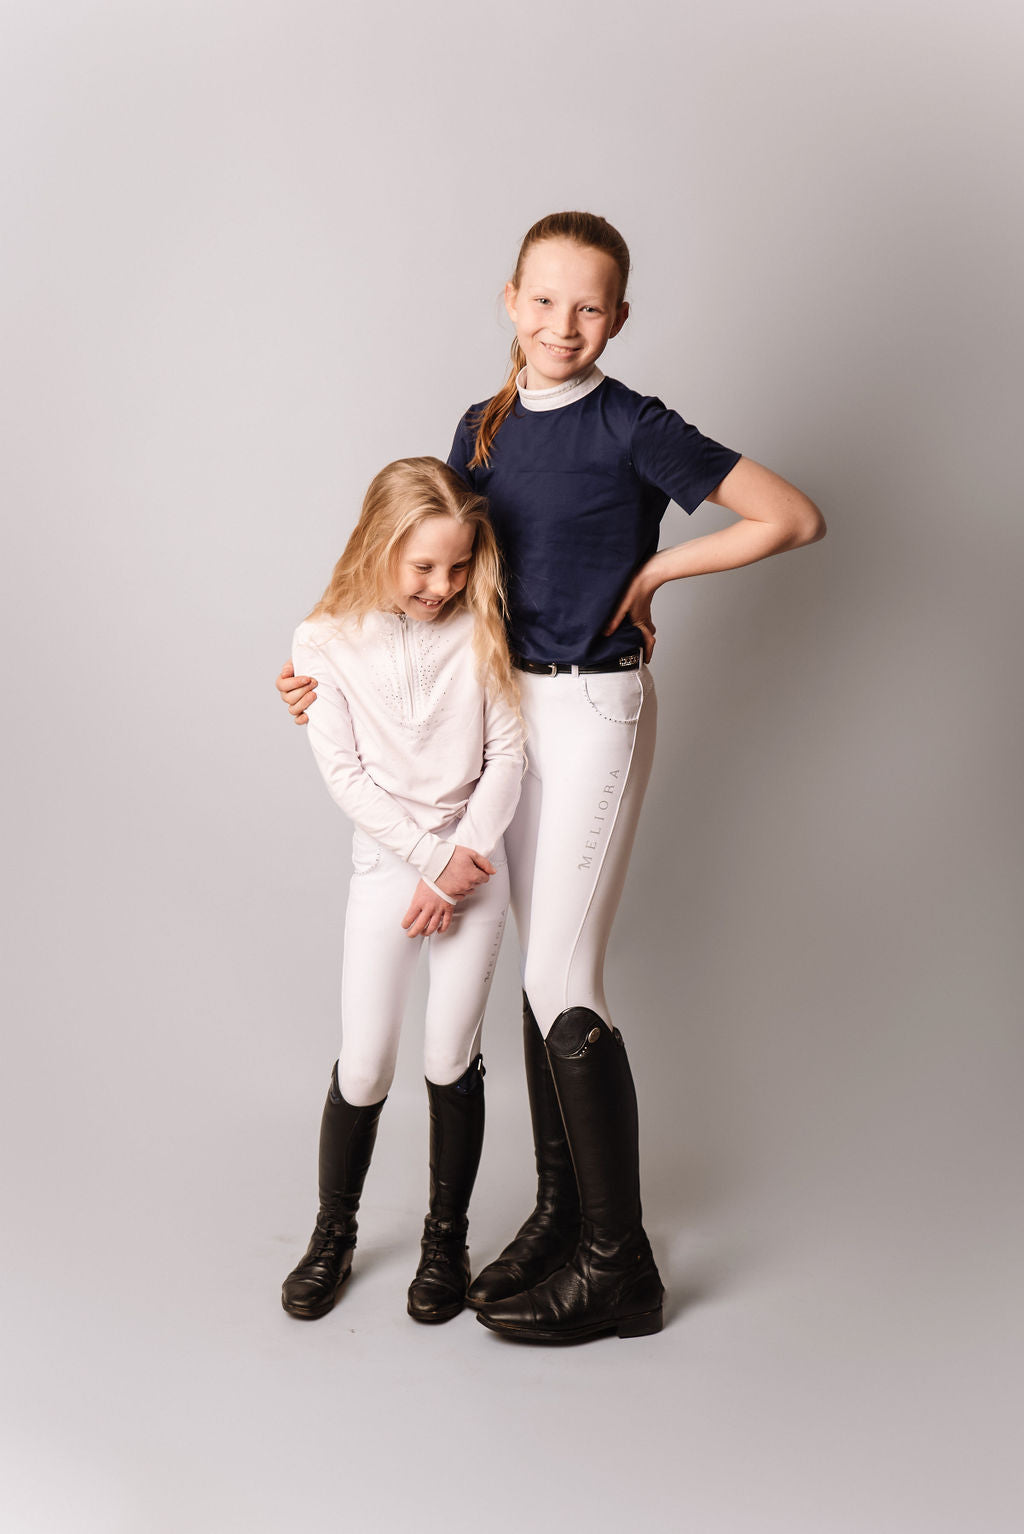 White Competition Breeches by Meliora Equestrian perfect for younger riders - photo of breeches